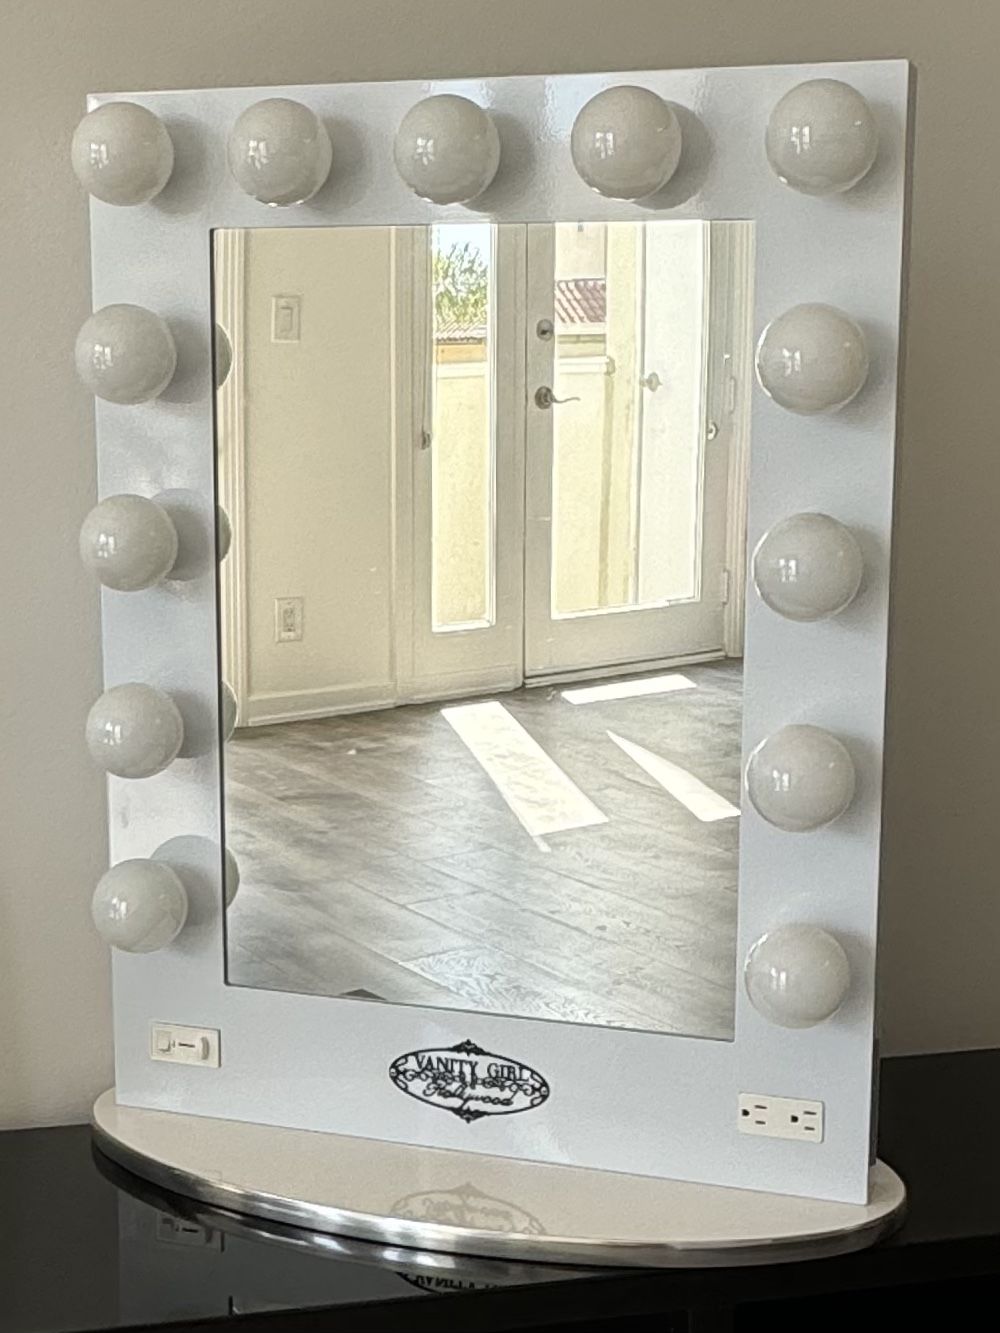 White Vanity Girl Hollywood luxury makeup mirror with lights & 2 power outlets